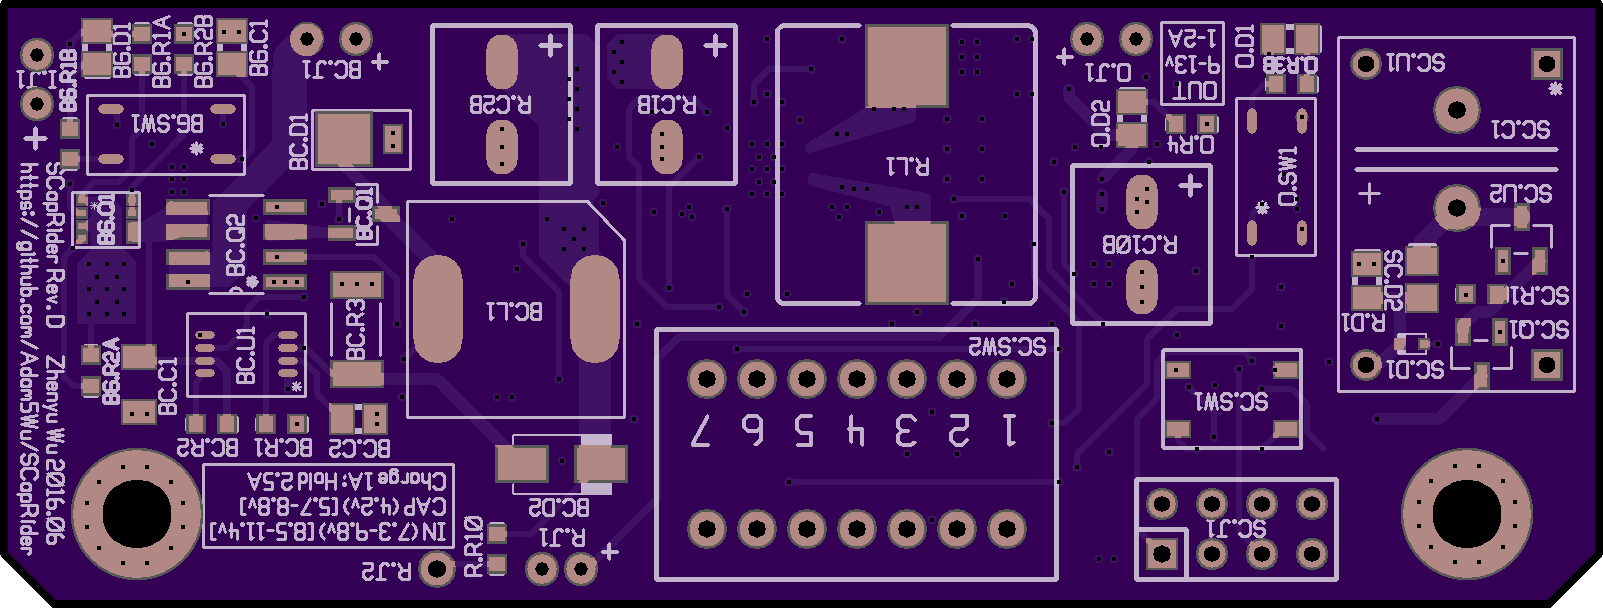 PCB Overview - Front